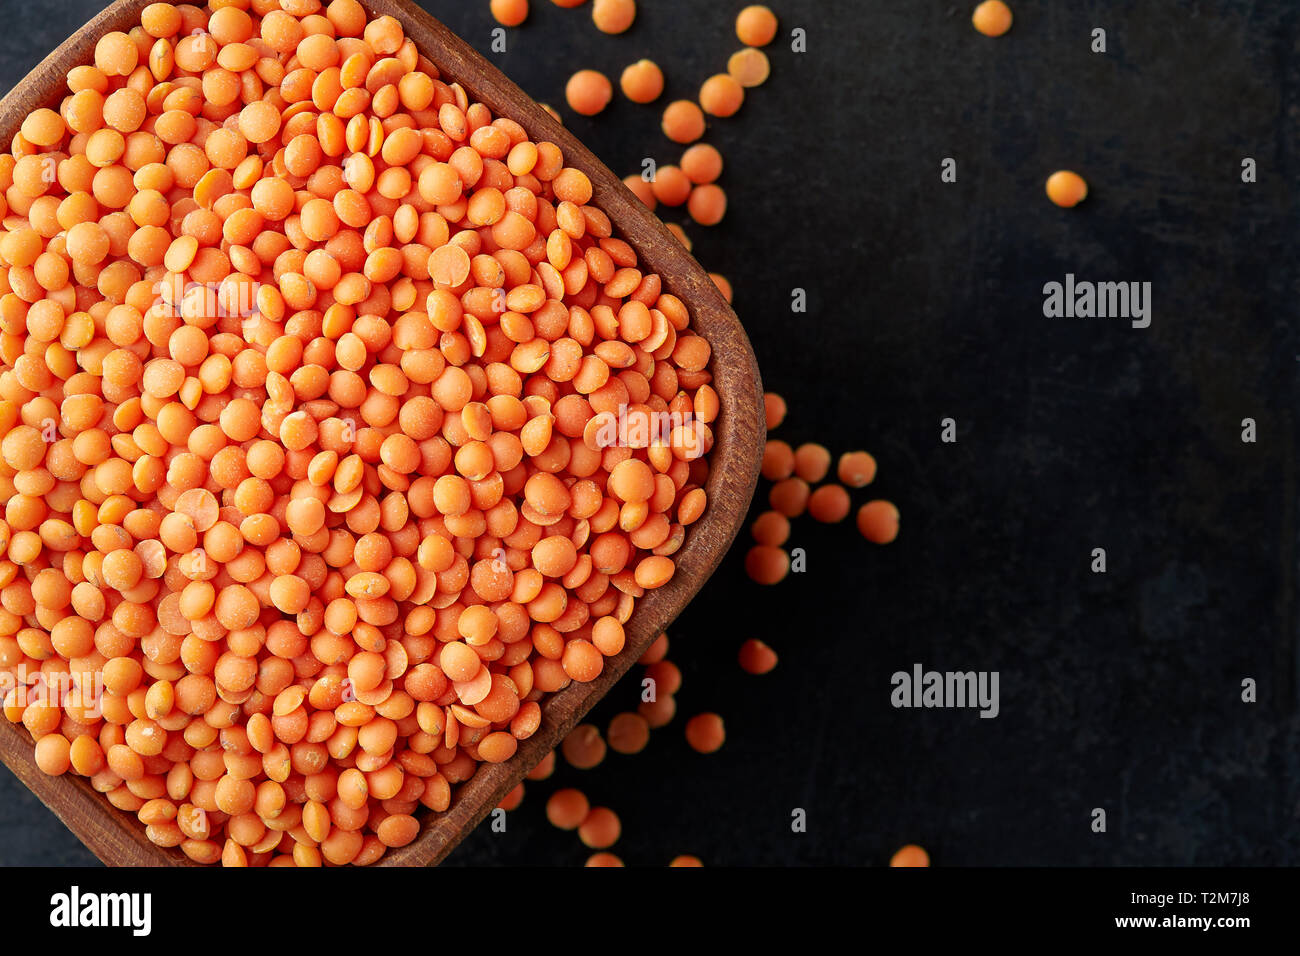 Raw uncooked red lentils (lens culinaris) in wooden bowl. Top view with ...